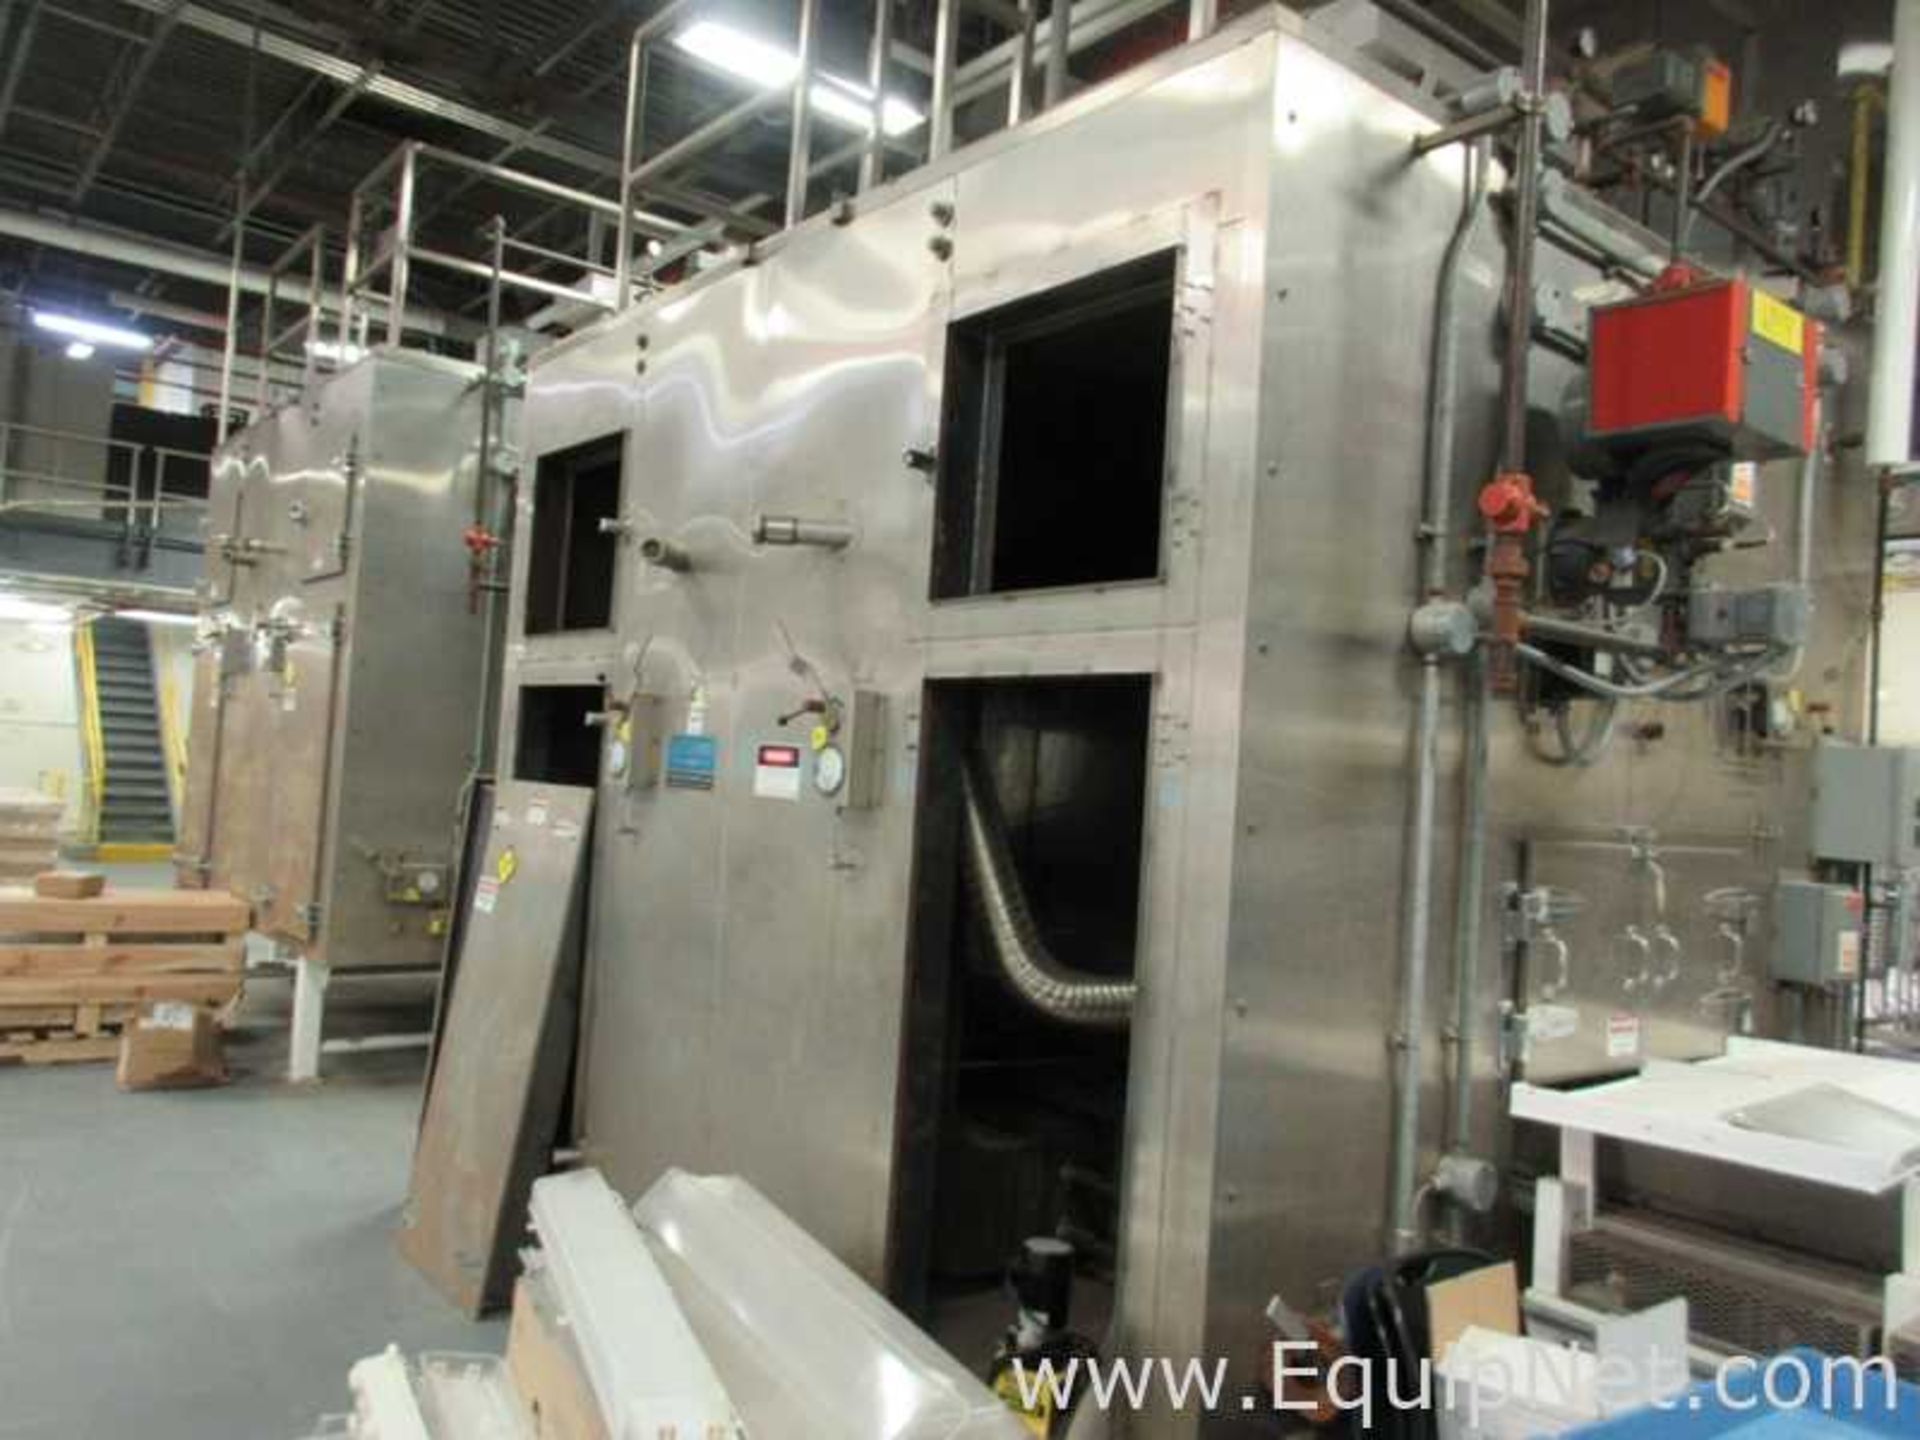 EQUIPNET LISTING #597081; REMOVAL COST: $0; DESCRIPTION: Wolverine Corporation Jet Zone Dryer - Image 5 of 18